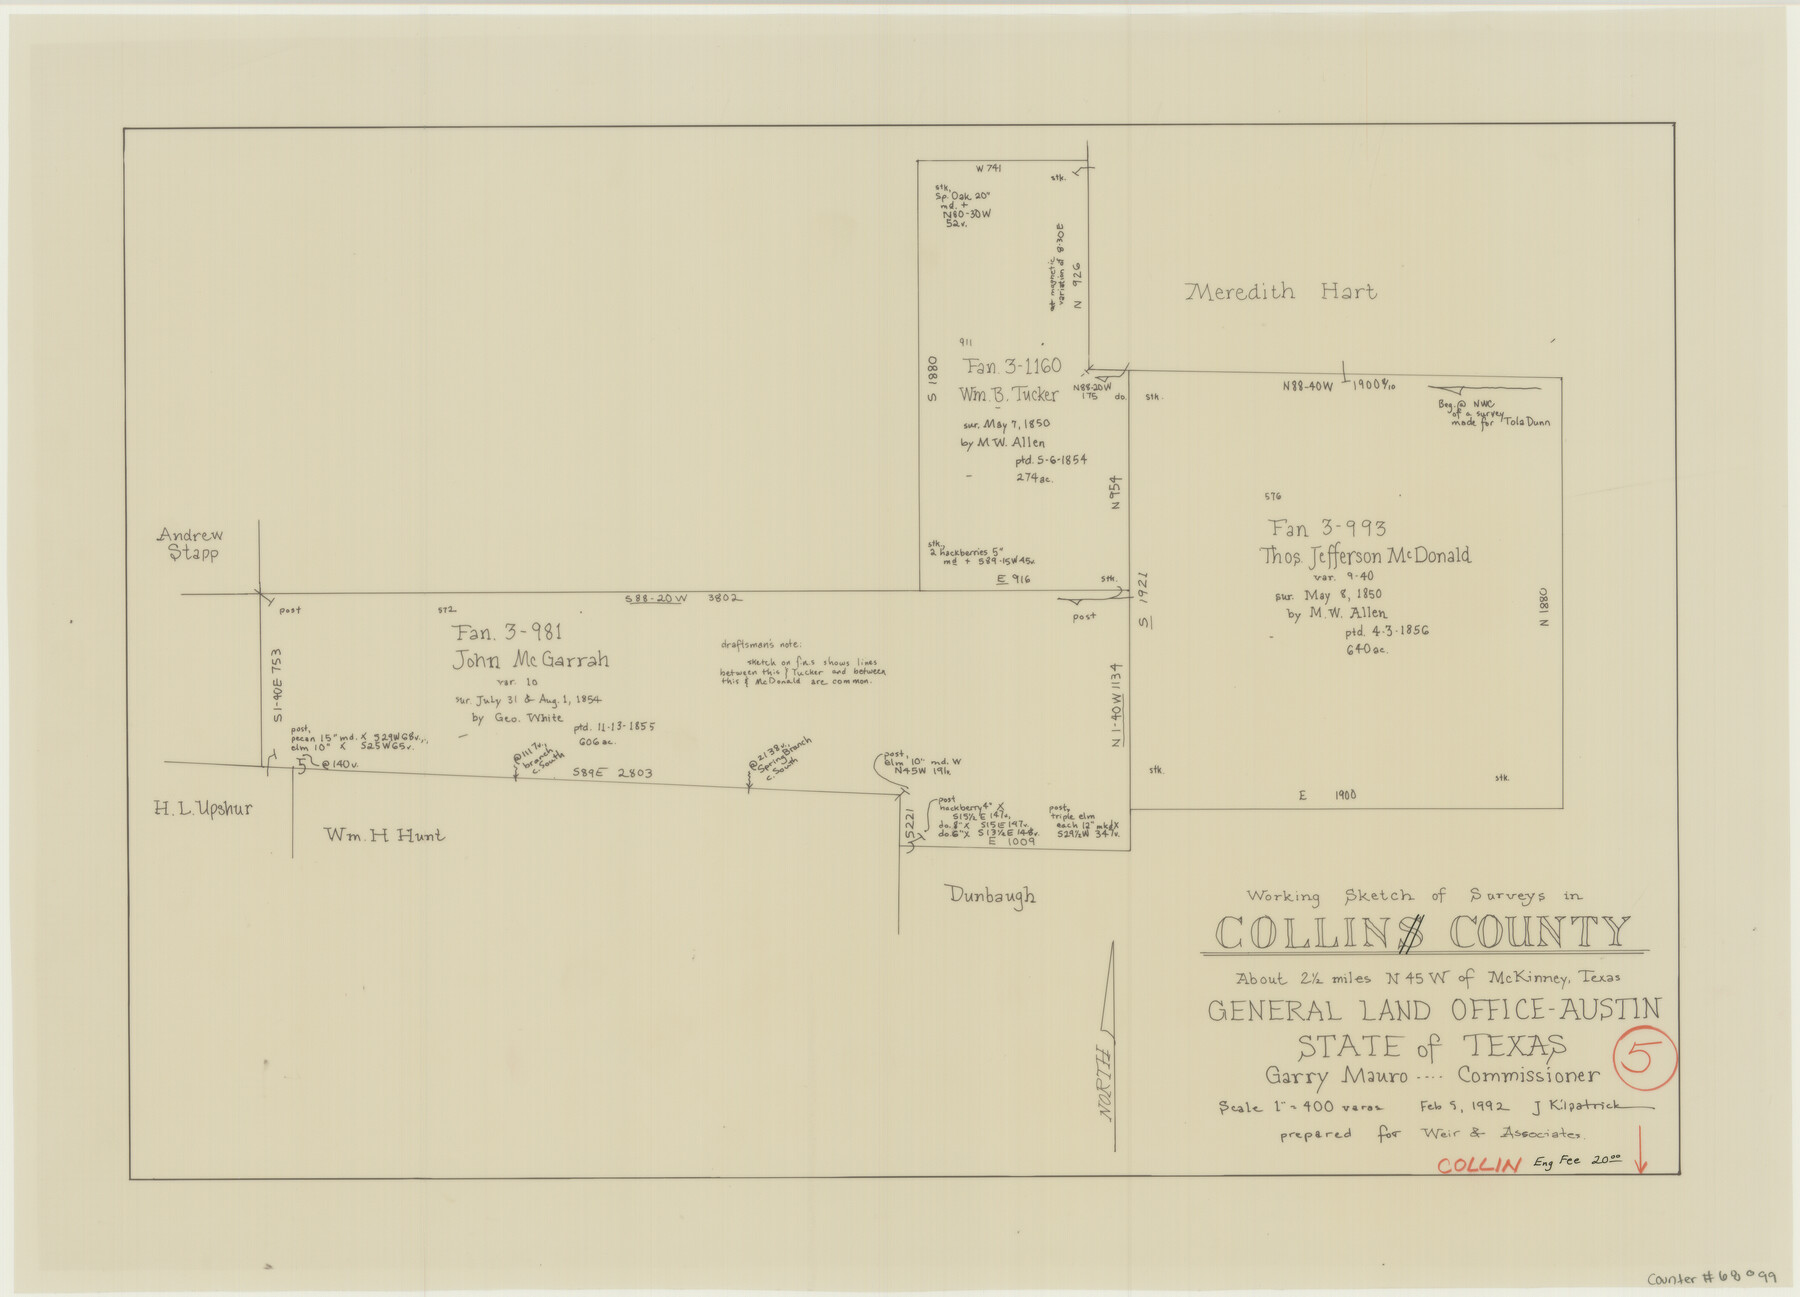 68099, Collin County Working Sketch 5, General Map Collection